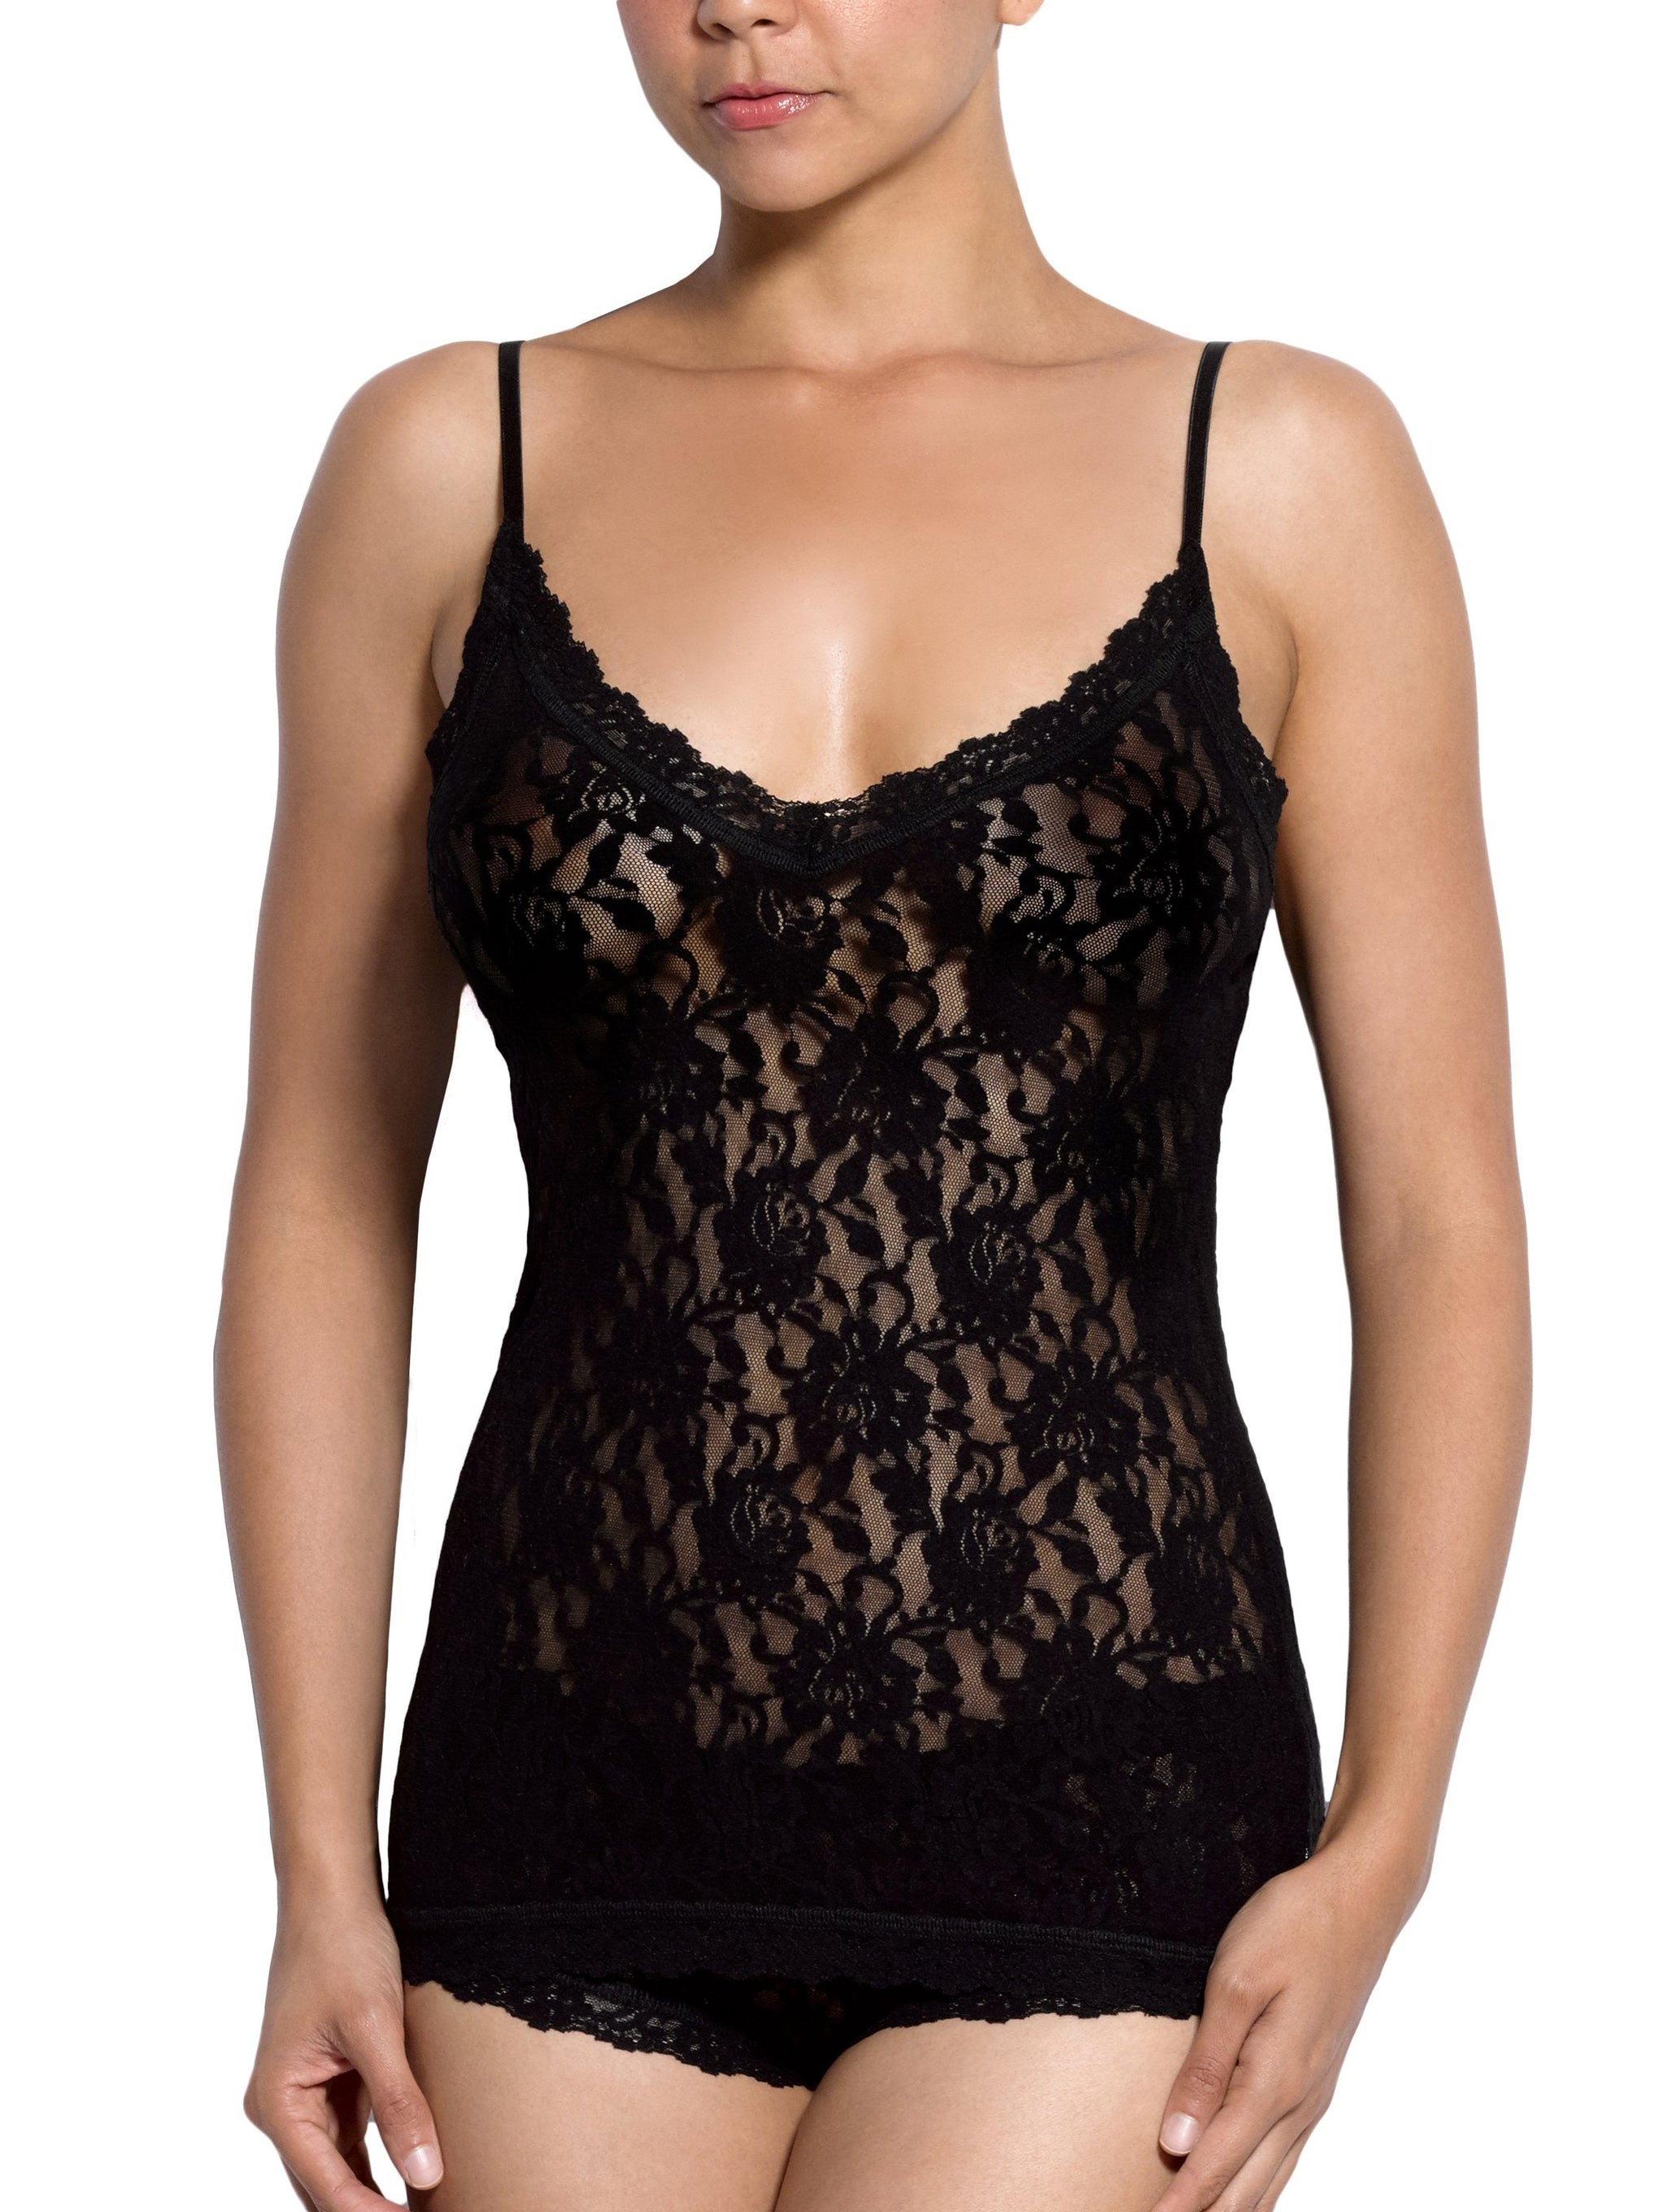 Black Crochet Lace V Neck Lace Camisole With Built In Bra And Padded Strap  Sleeveless, Sexy, And Fashionable From Starbrand, $16.83